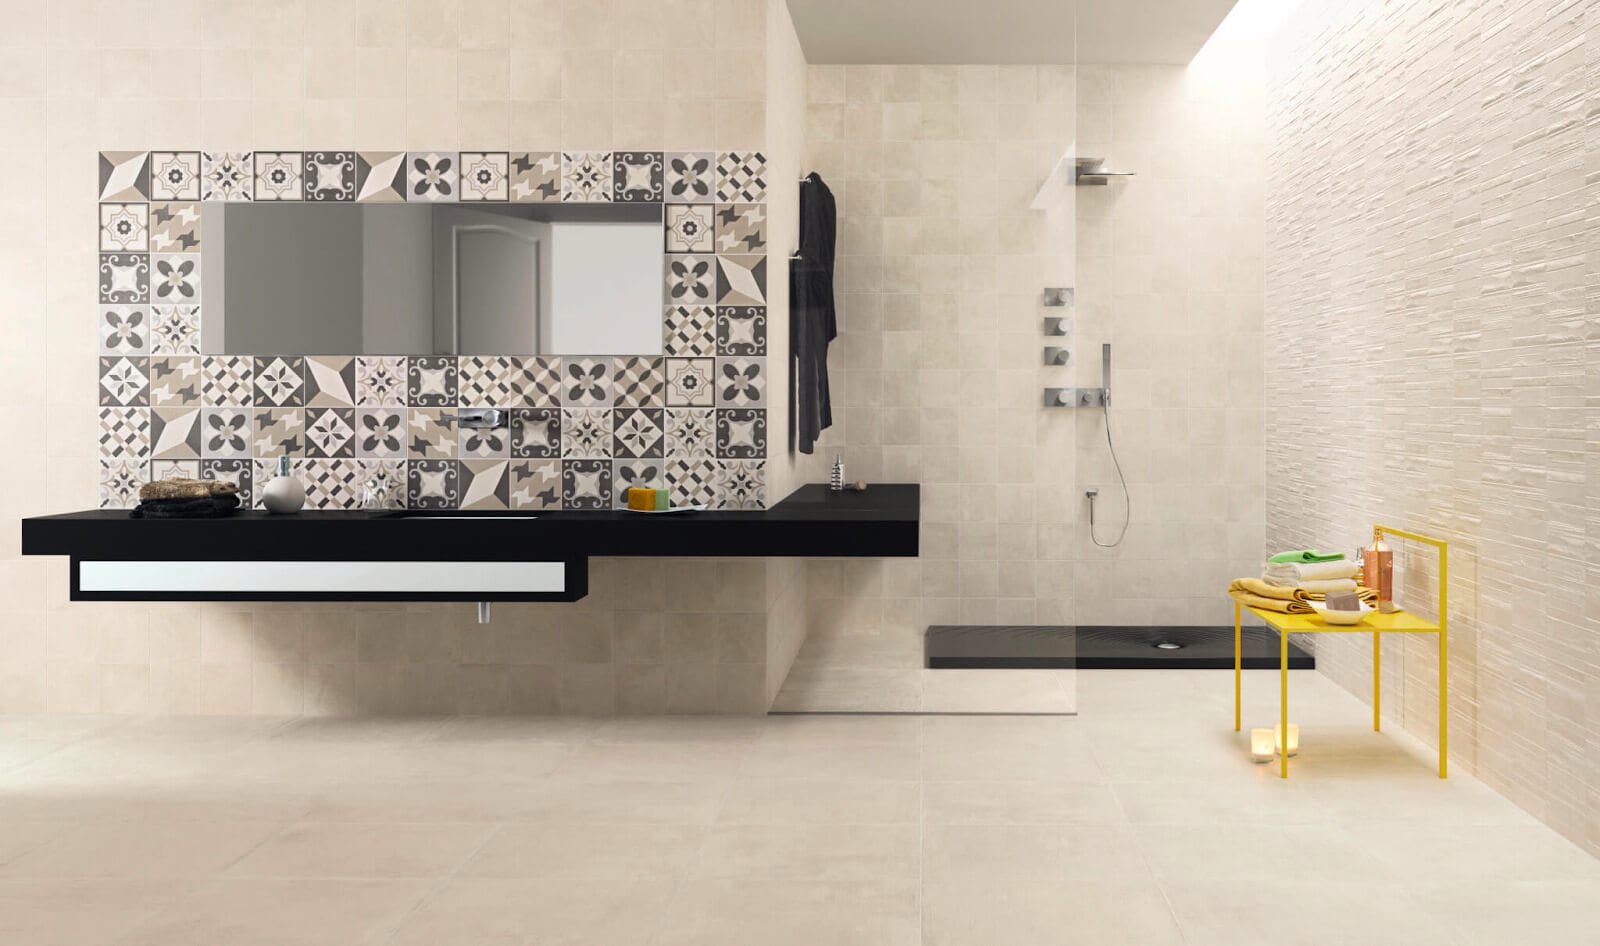 Bathroom with mix and match of different tile patterns

